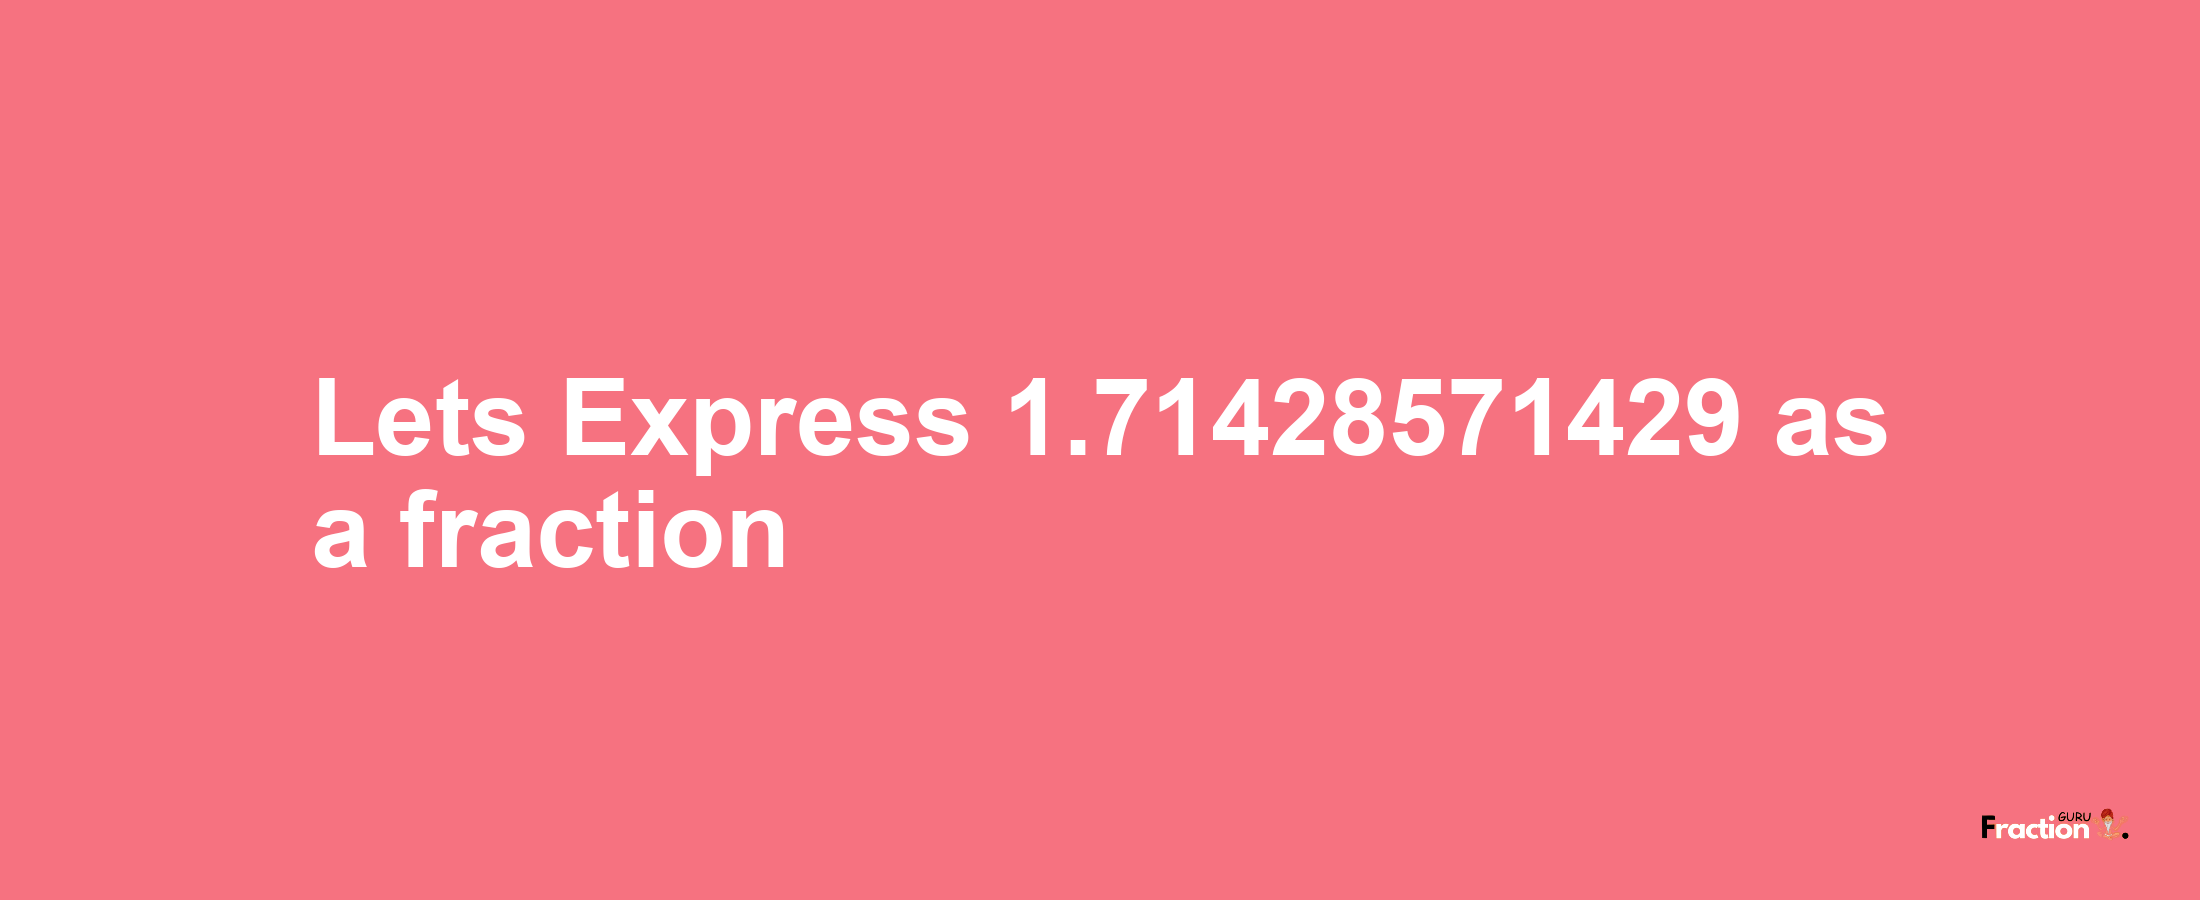 Lets Express 1.71428571429 as afraction